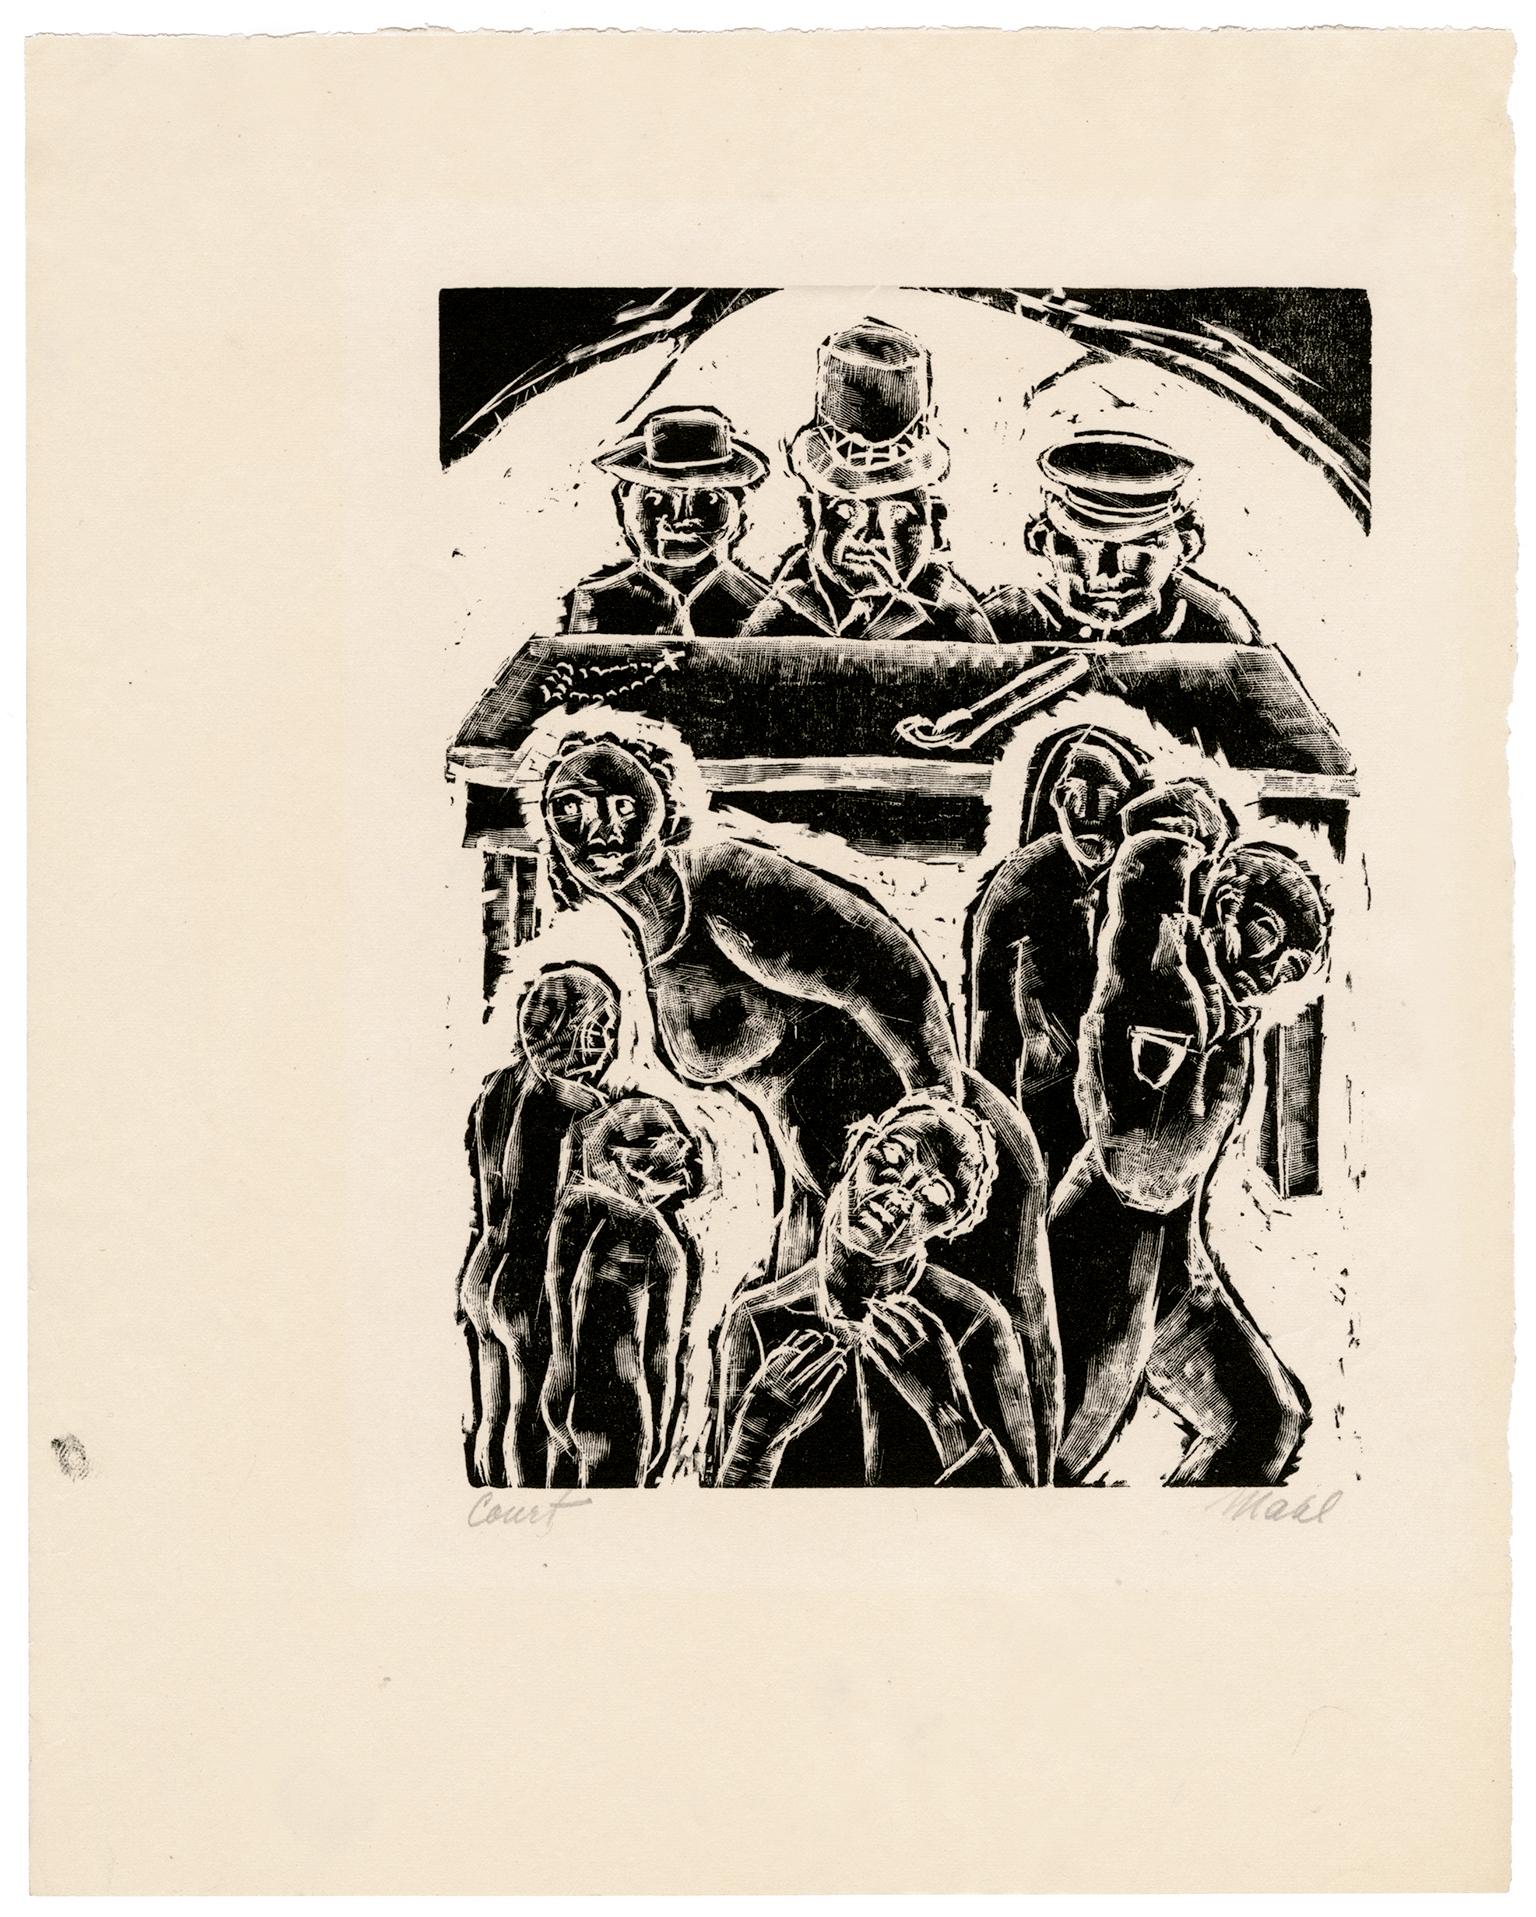 'Court' — 1930s Social Conscience, WPA Woman Artist - Print by Claire Mahl Moore